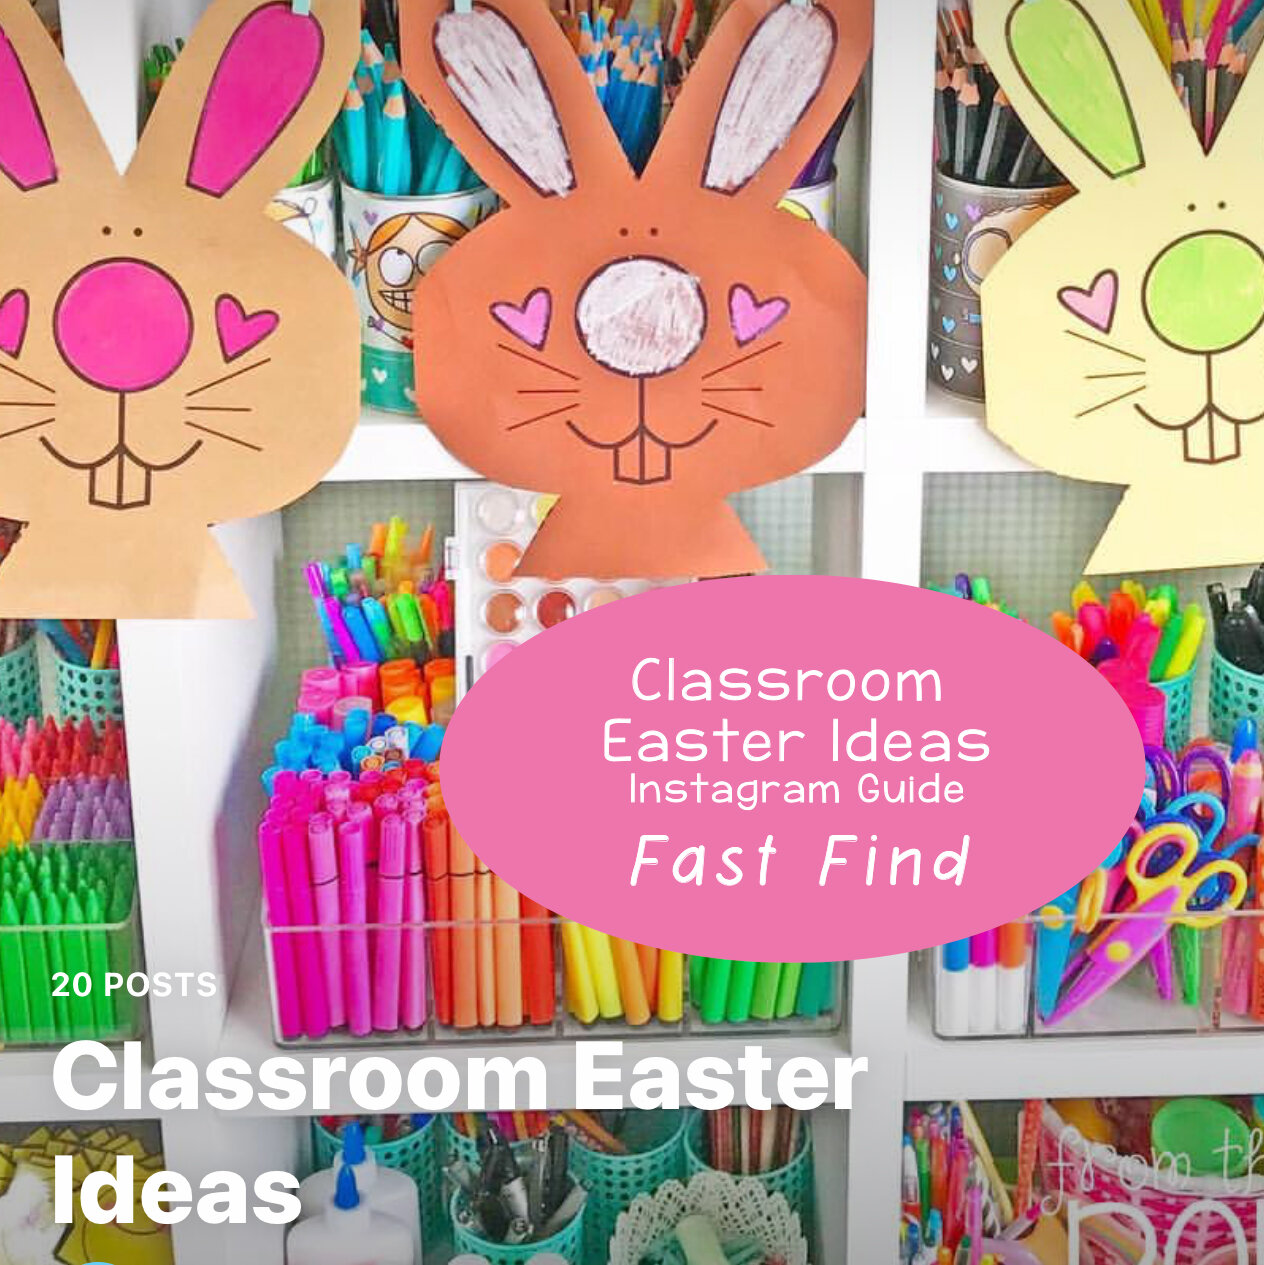 Classroom Easter Ideas Guide